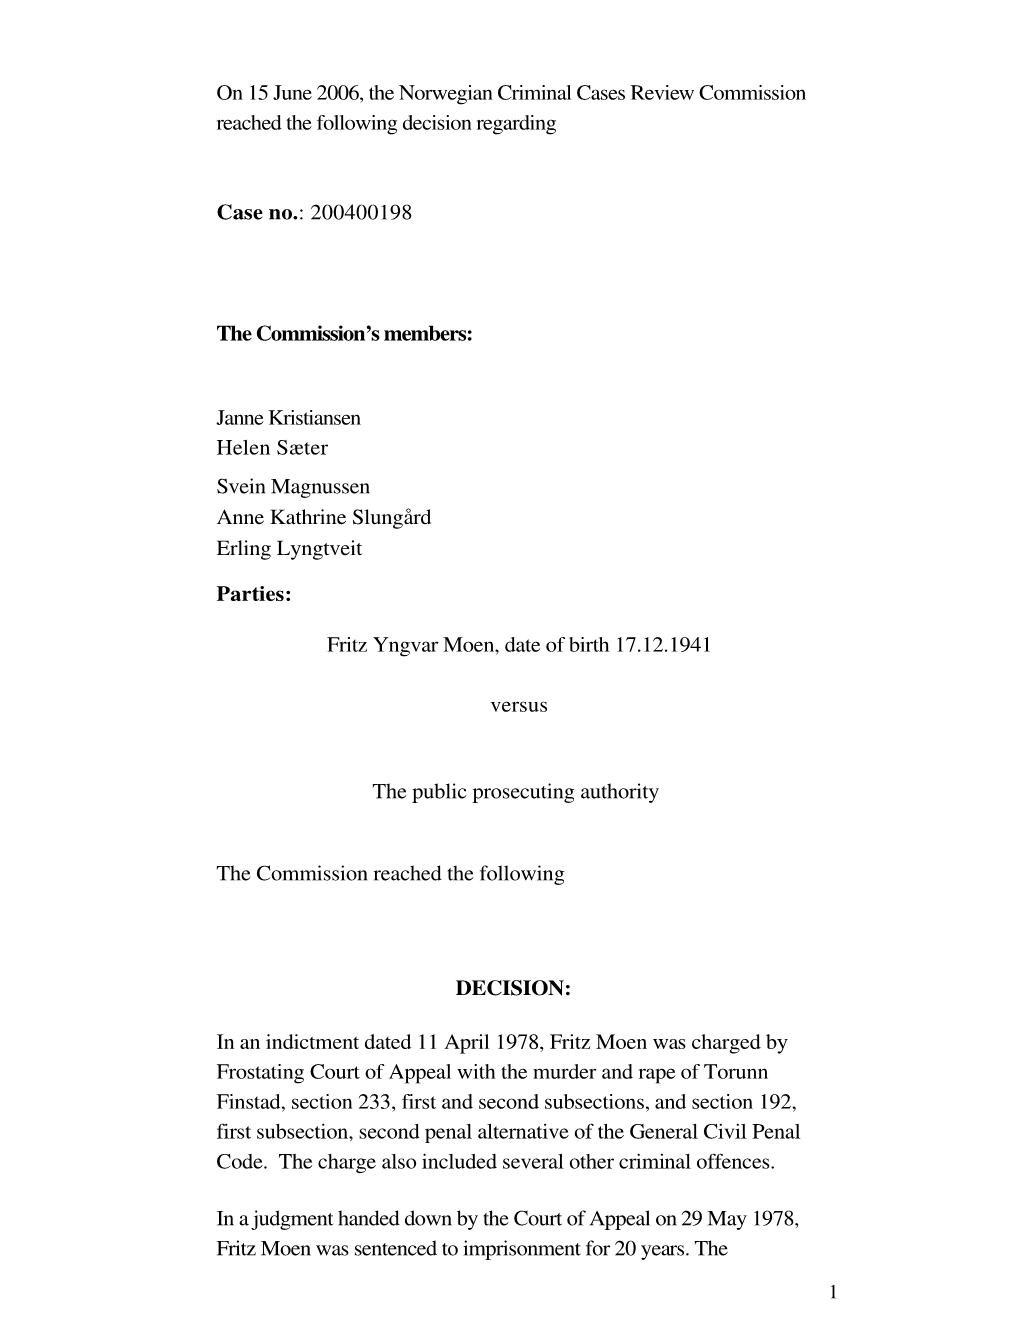 On 15 June 2006, the Norwegian Criminal Cases Review Commission Reached the Following Decision Regarding